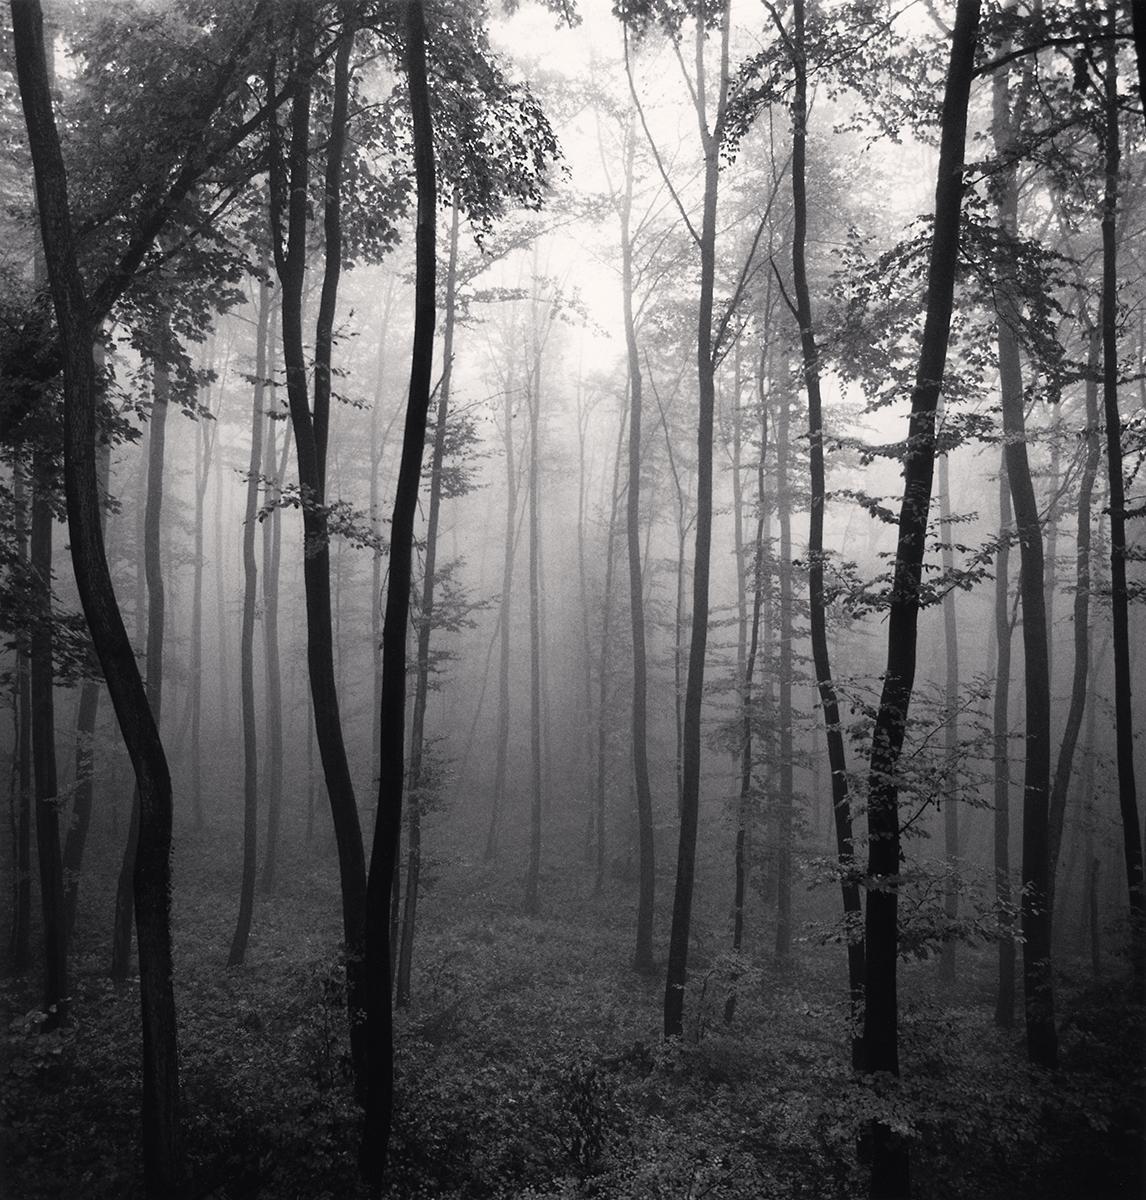 Jura Forest, Dornach, Switzerland by Michael Kenna presents a dramatic forest scene. The dense forest fades into the background, the fog envelopes the trees. The dark trees frame a path further into the landscape. 

Jura Forest by Michael Kenna is